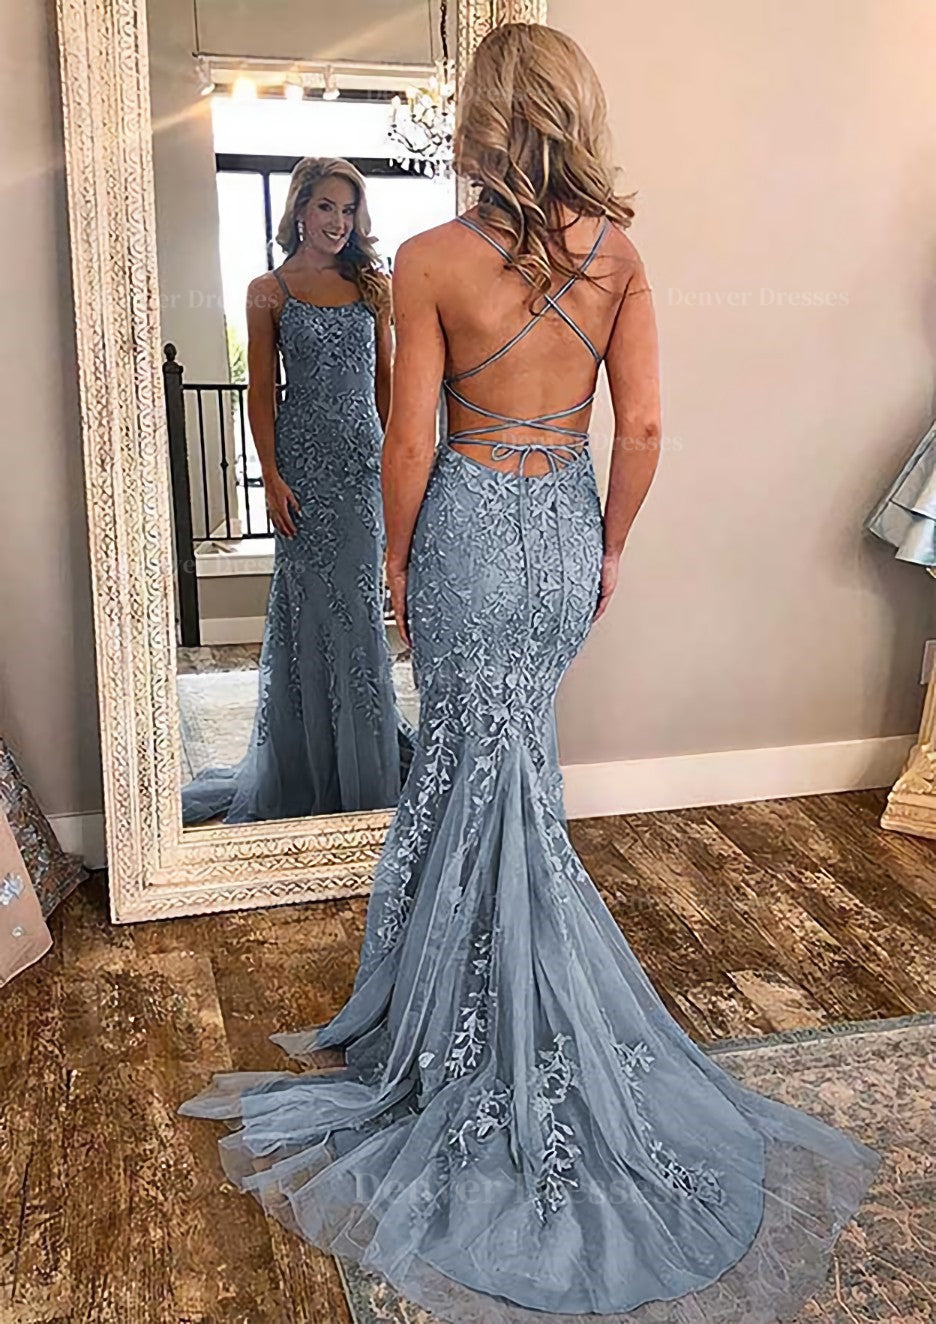 Prom Dresses On Sale, Sheath/Column Square Neckline Sleeveless Court Train Lace Prom Dress With Appliqued